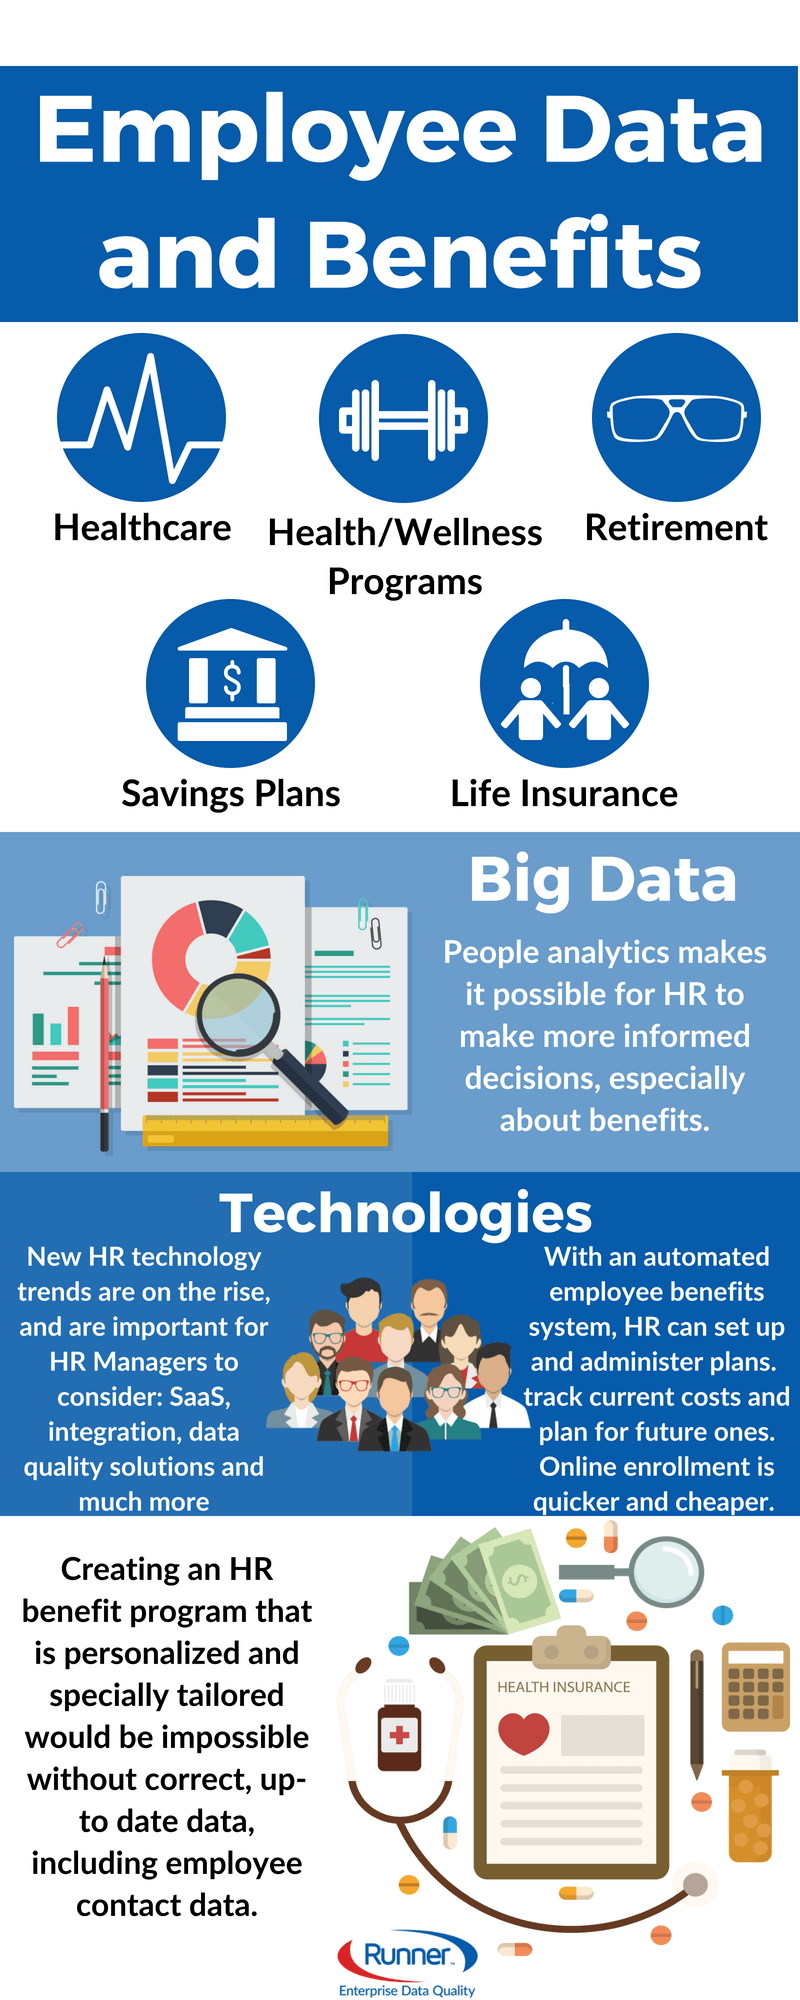 Using software solutions to improve collecting, verifying and using data is the future of HR employee management. It ensures an efficient employee benefits program, which can play a big part in an employee’s decision to work for a company.